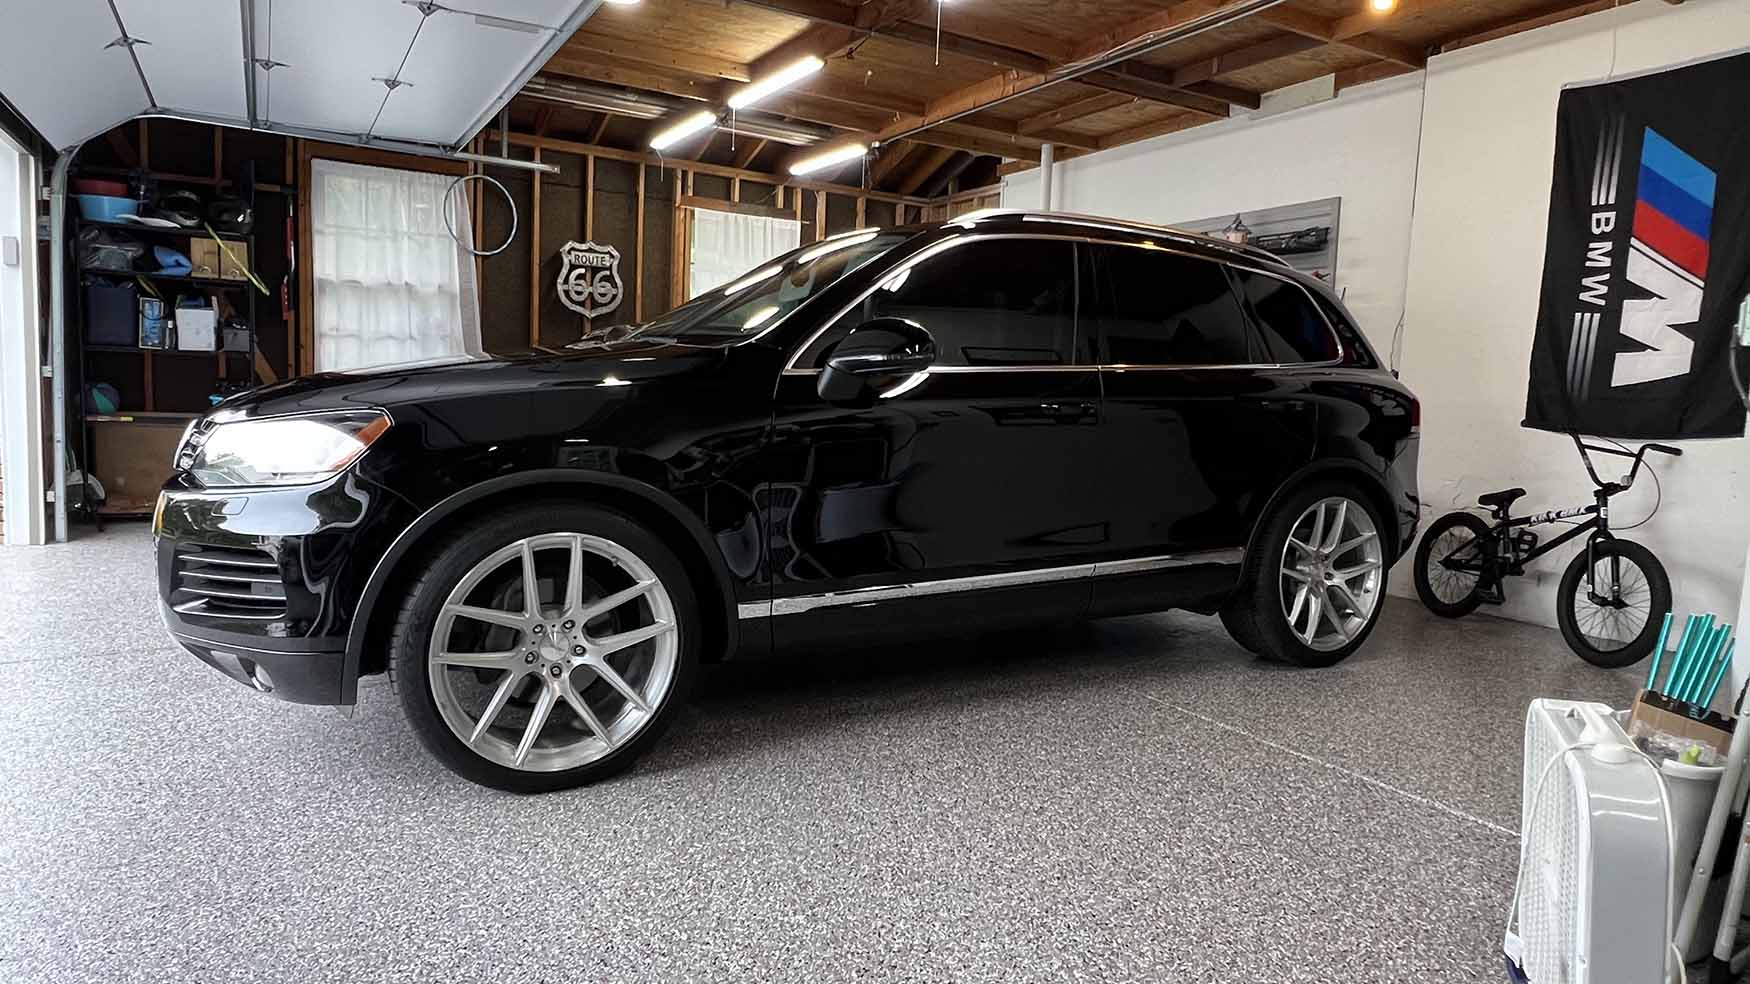 2014 VW Touareg with 22" Aftermarket Wheels & H&R Sport Springs